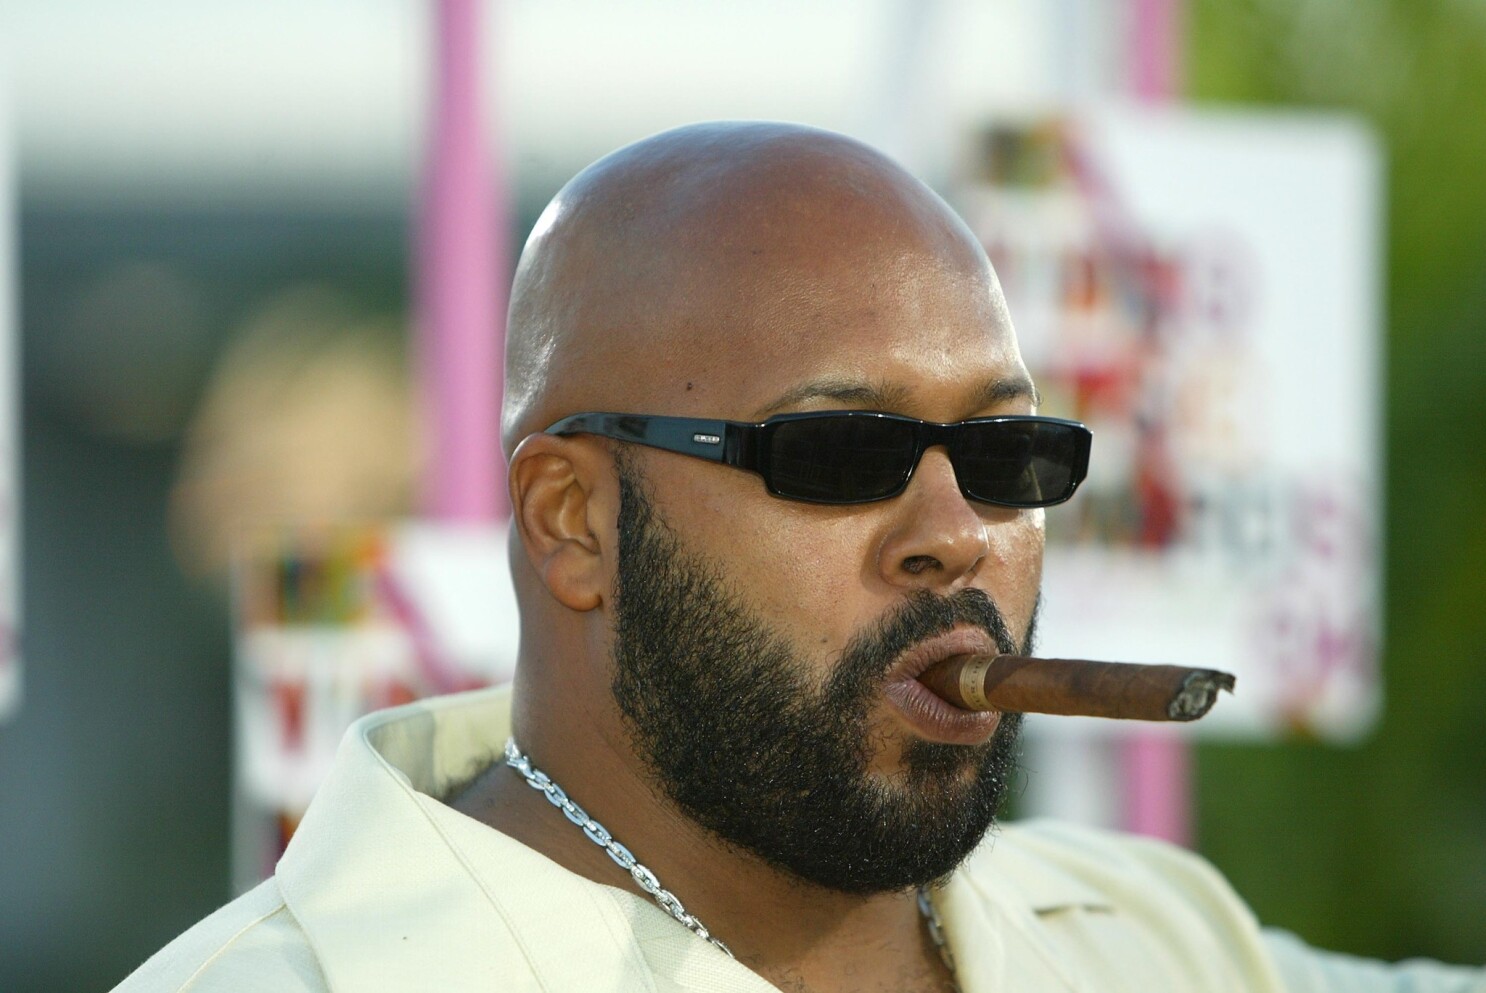 Suge Knight remains stuck in a gangsta rap past - Los Angeles Times